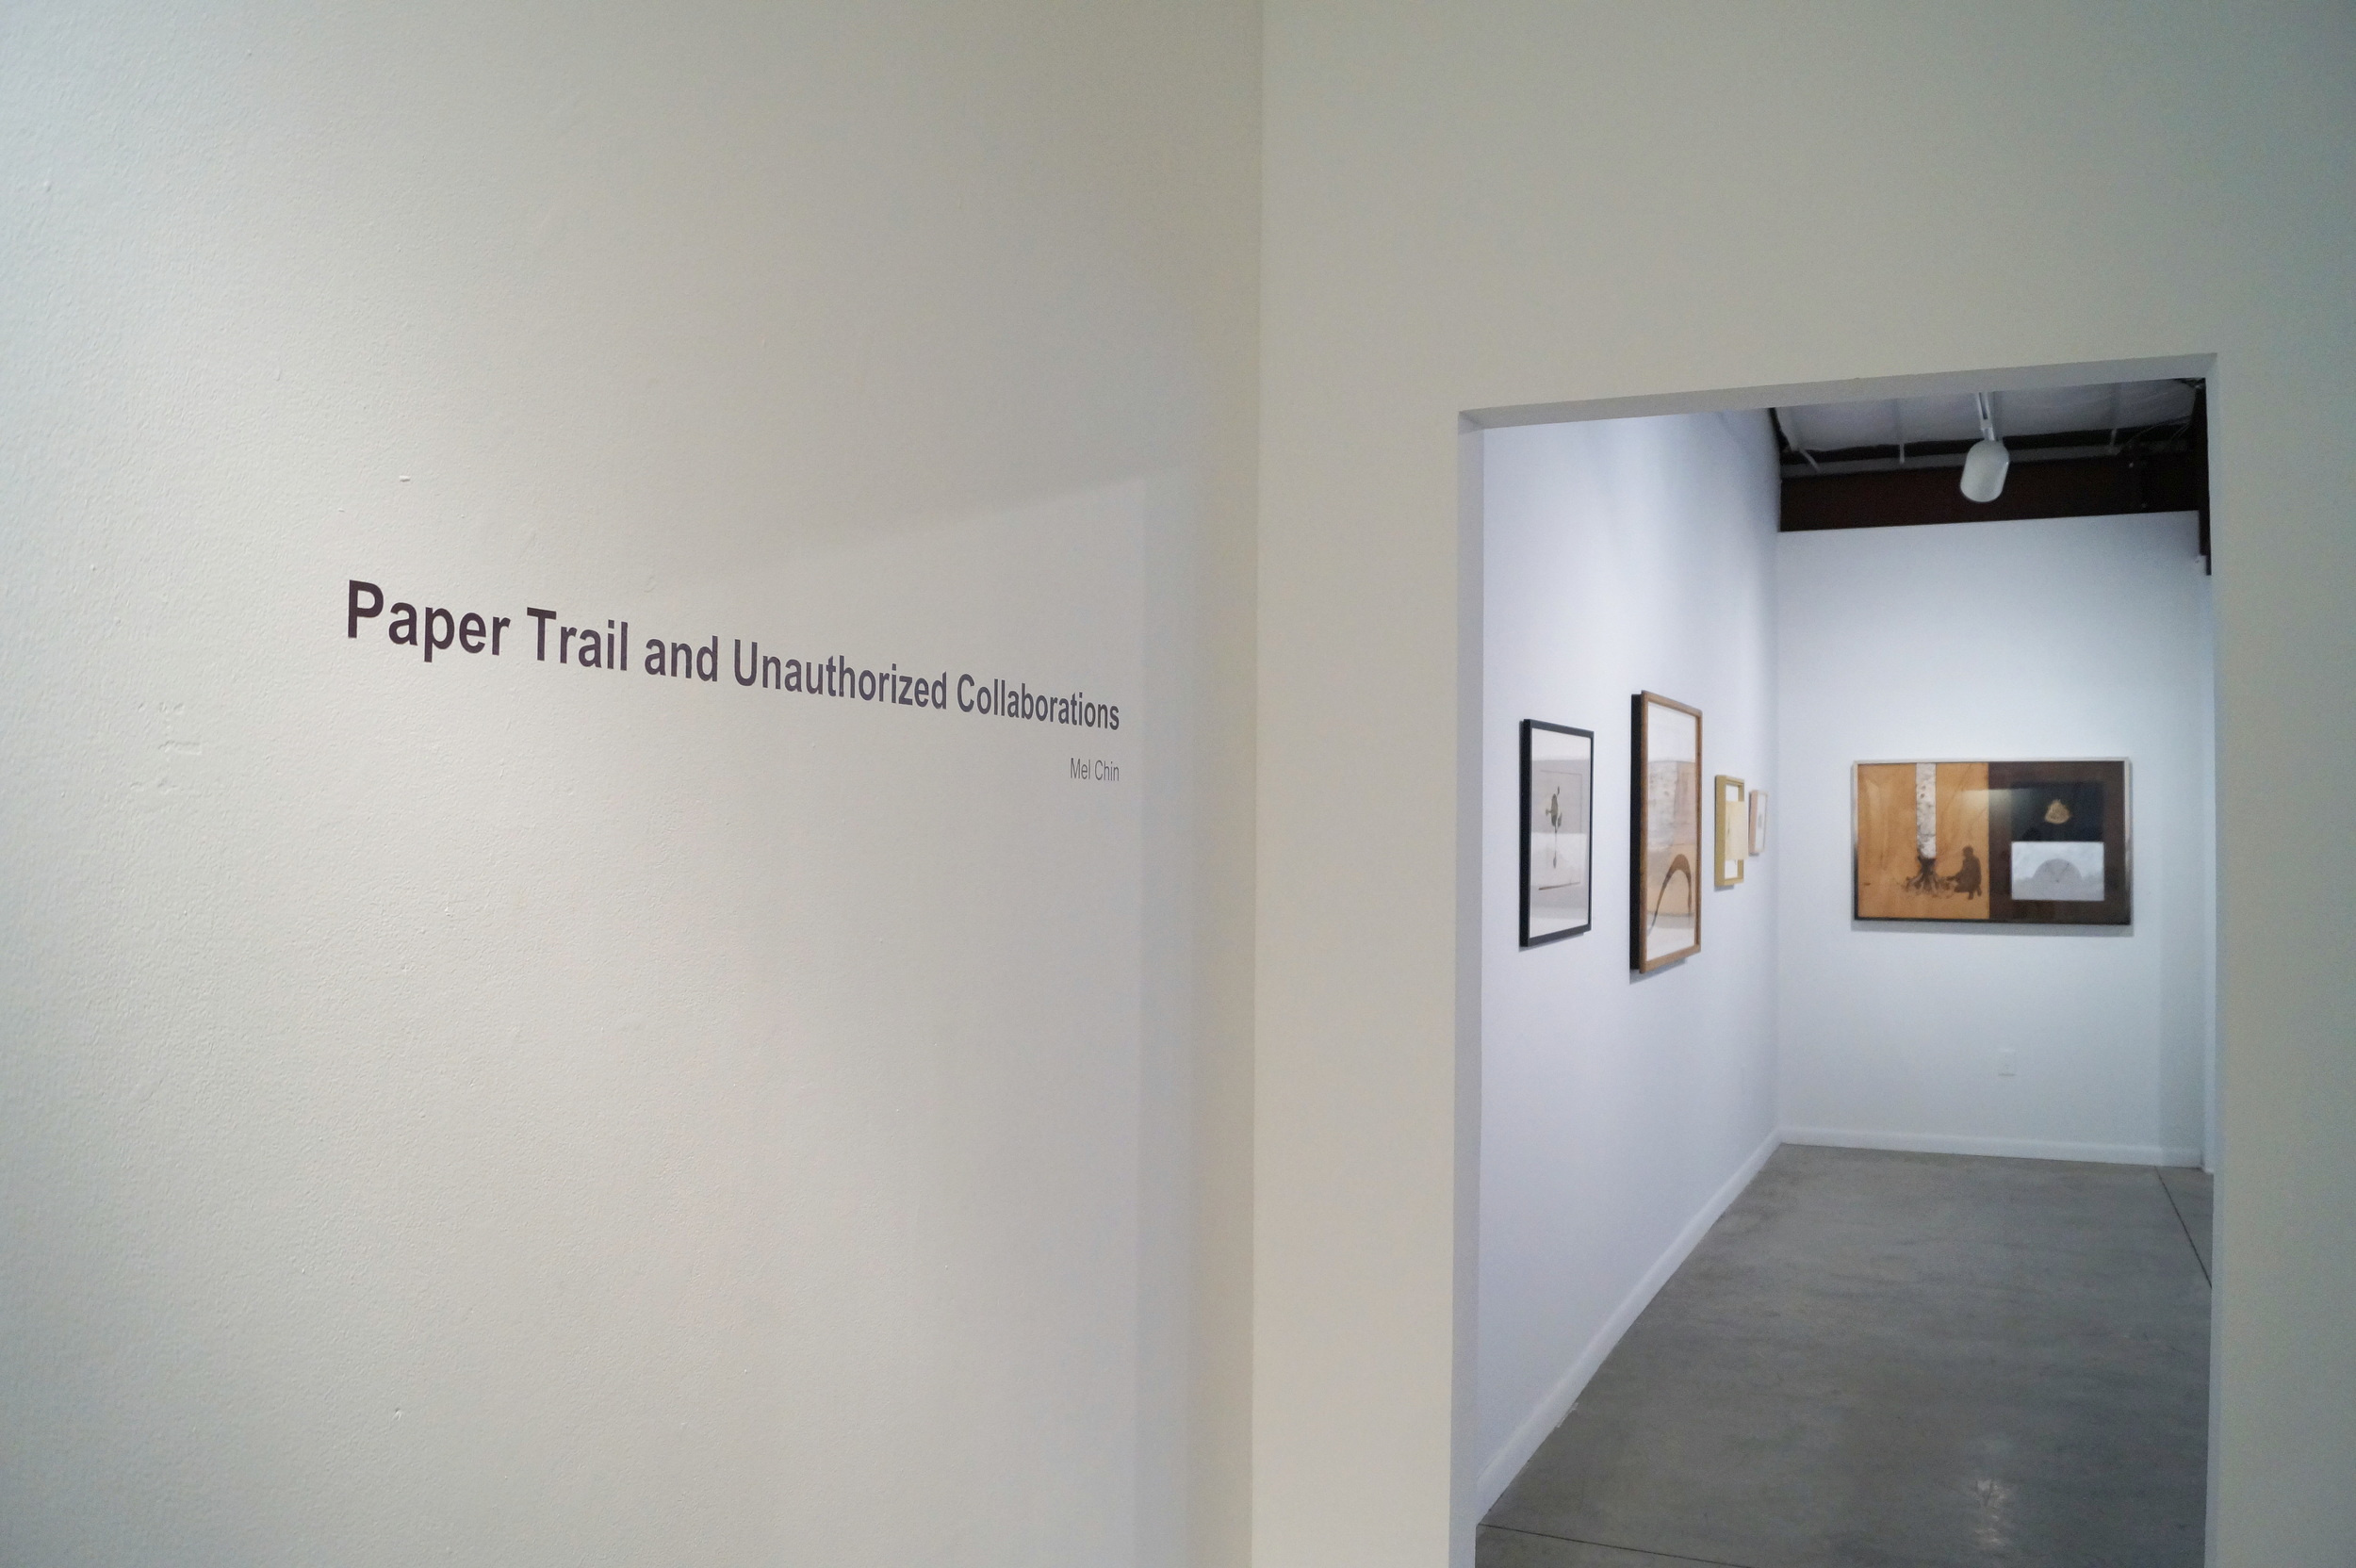 Paper Trail and Unauthorized Collaborations by Mel Chin - Photo by Jennie Ash 5.JPG